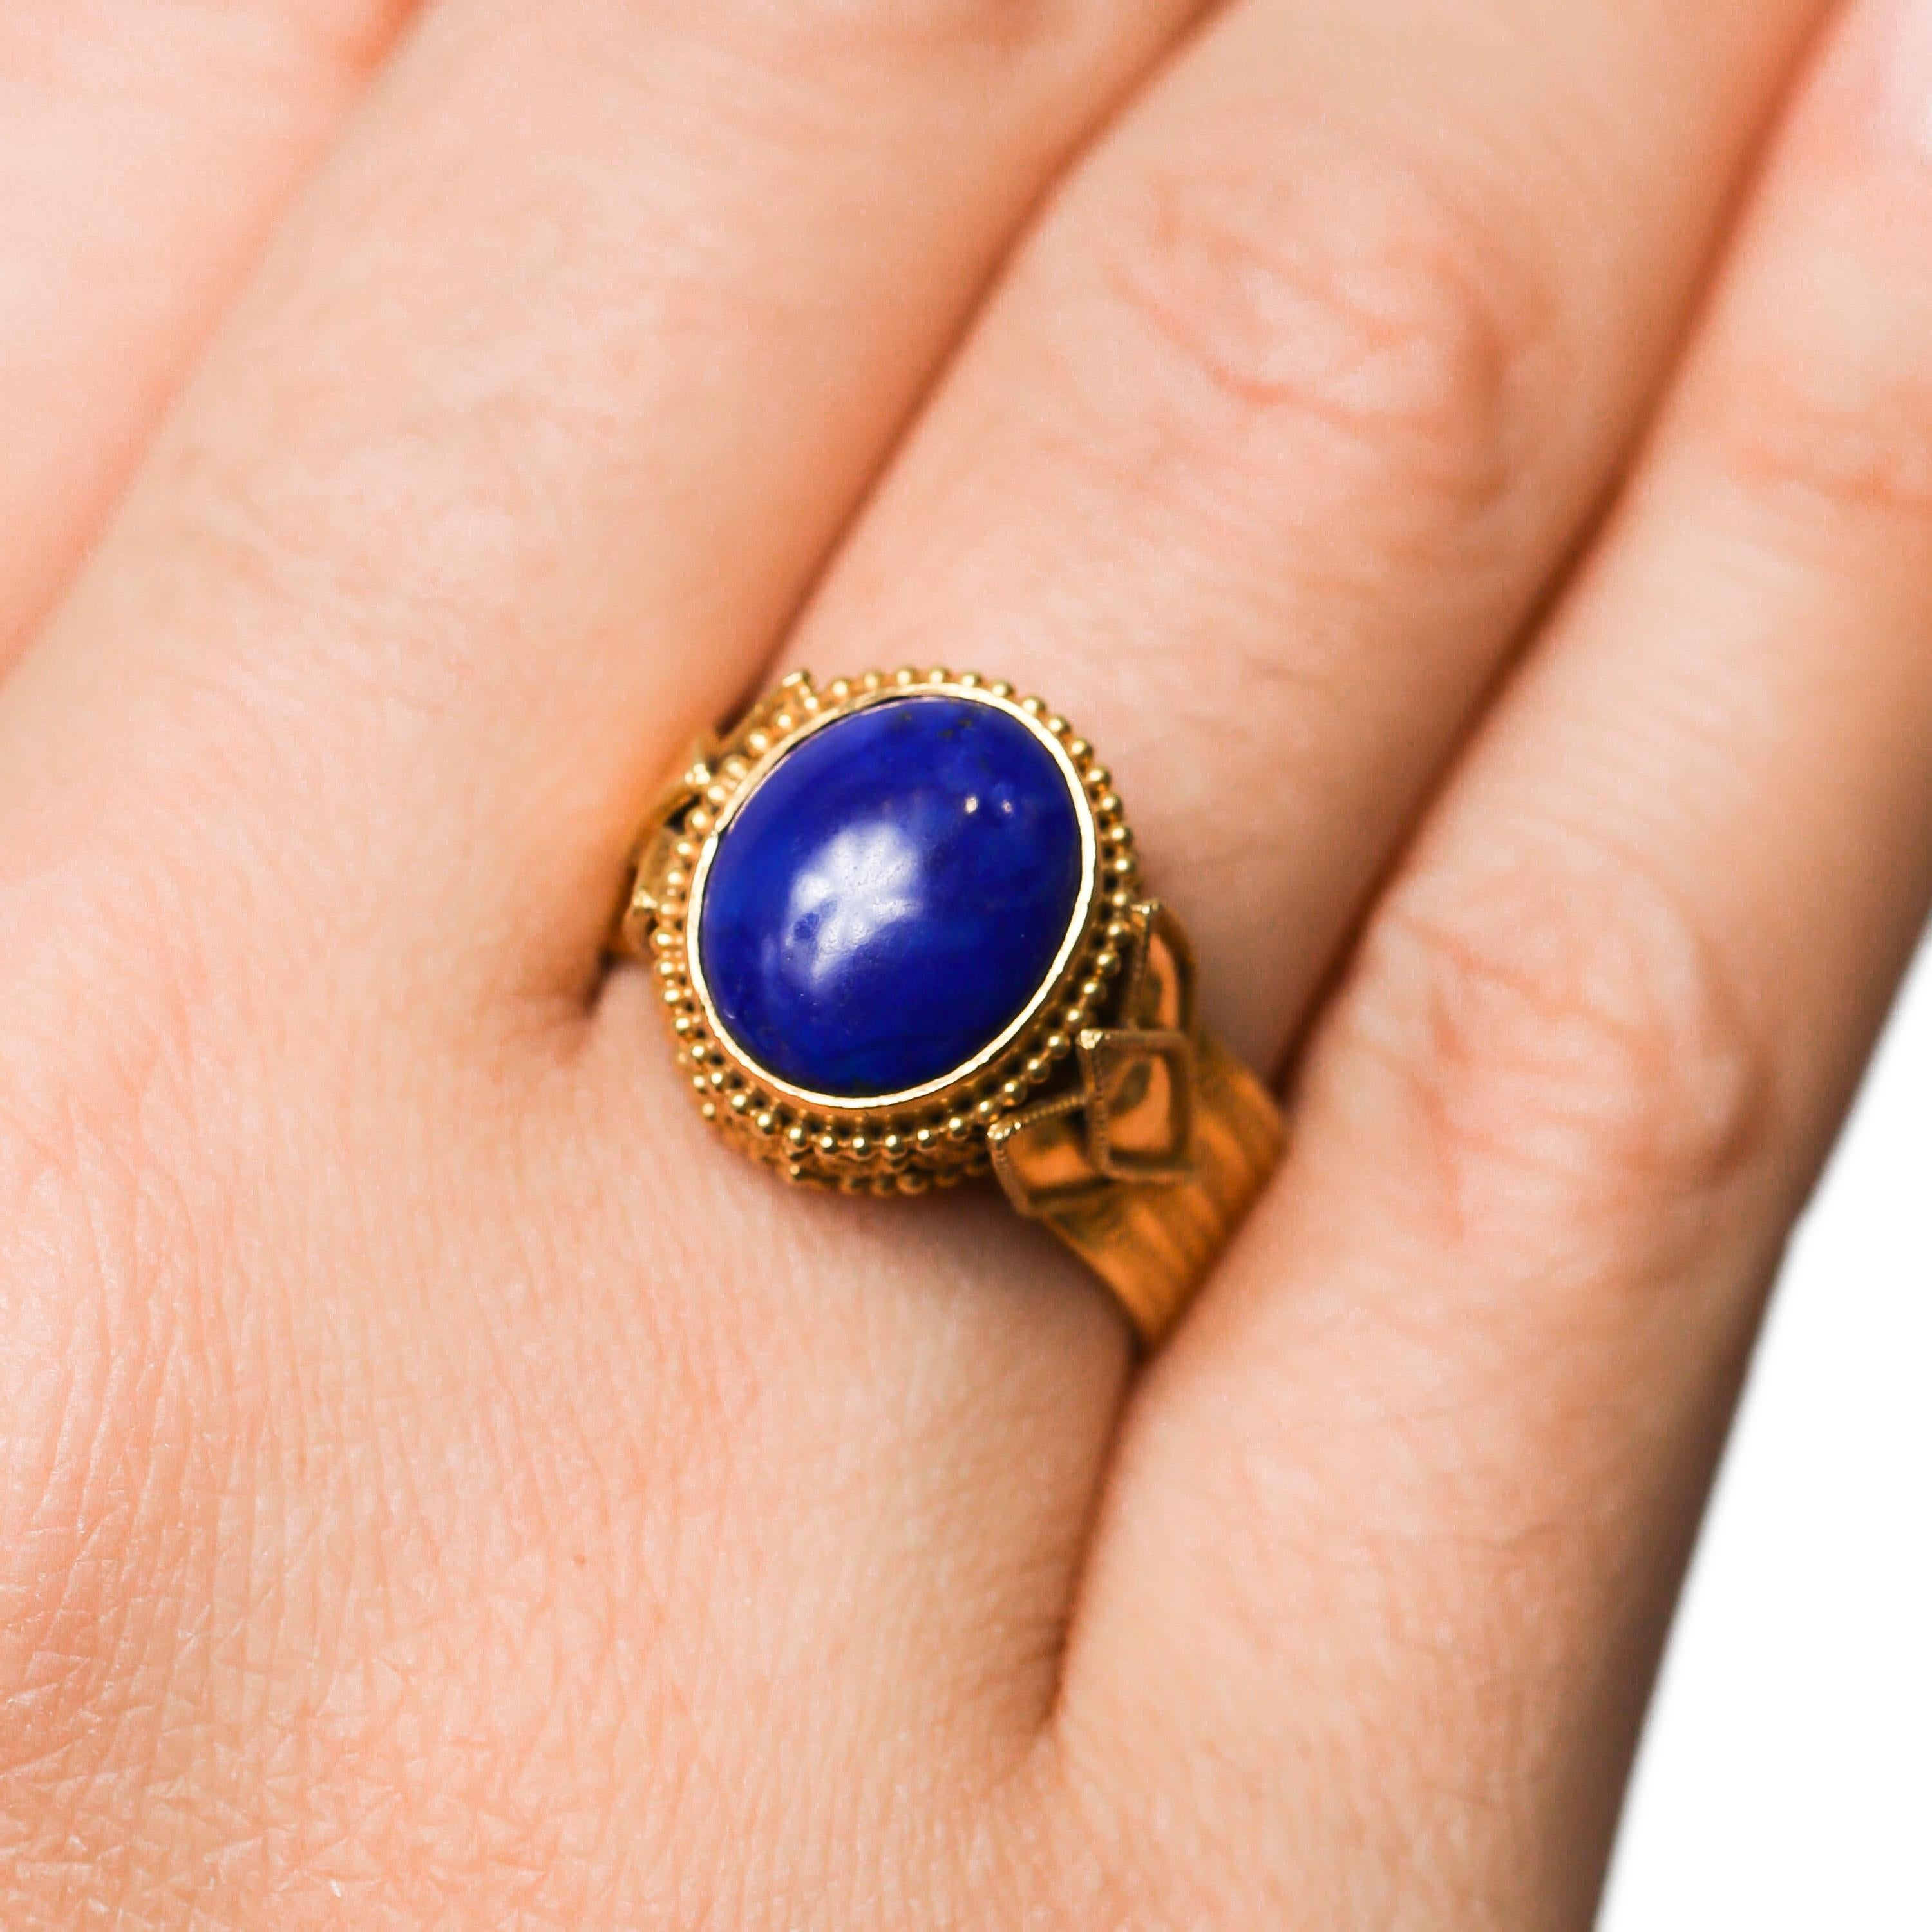 Blue Cabochon Oval Shape Gemstone 22 Karat Yellow Gold Ring  In New Condition For Sale In New York, NY